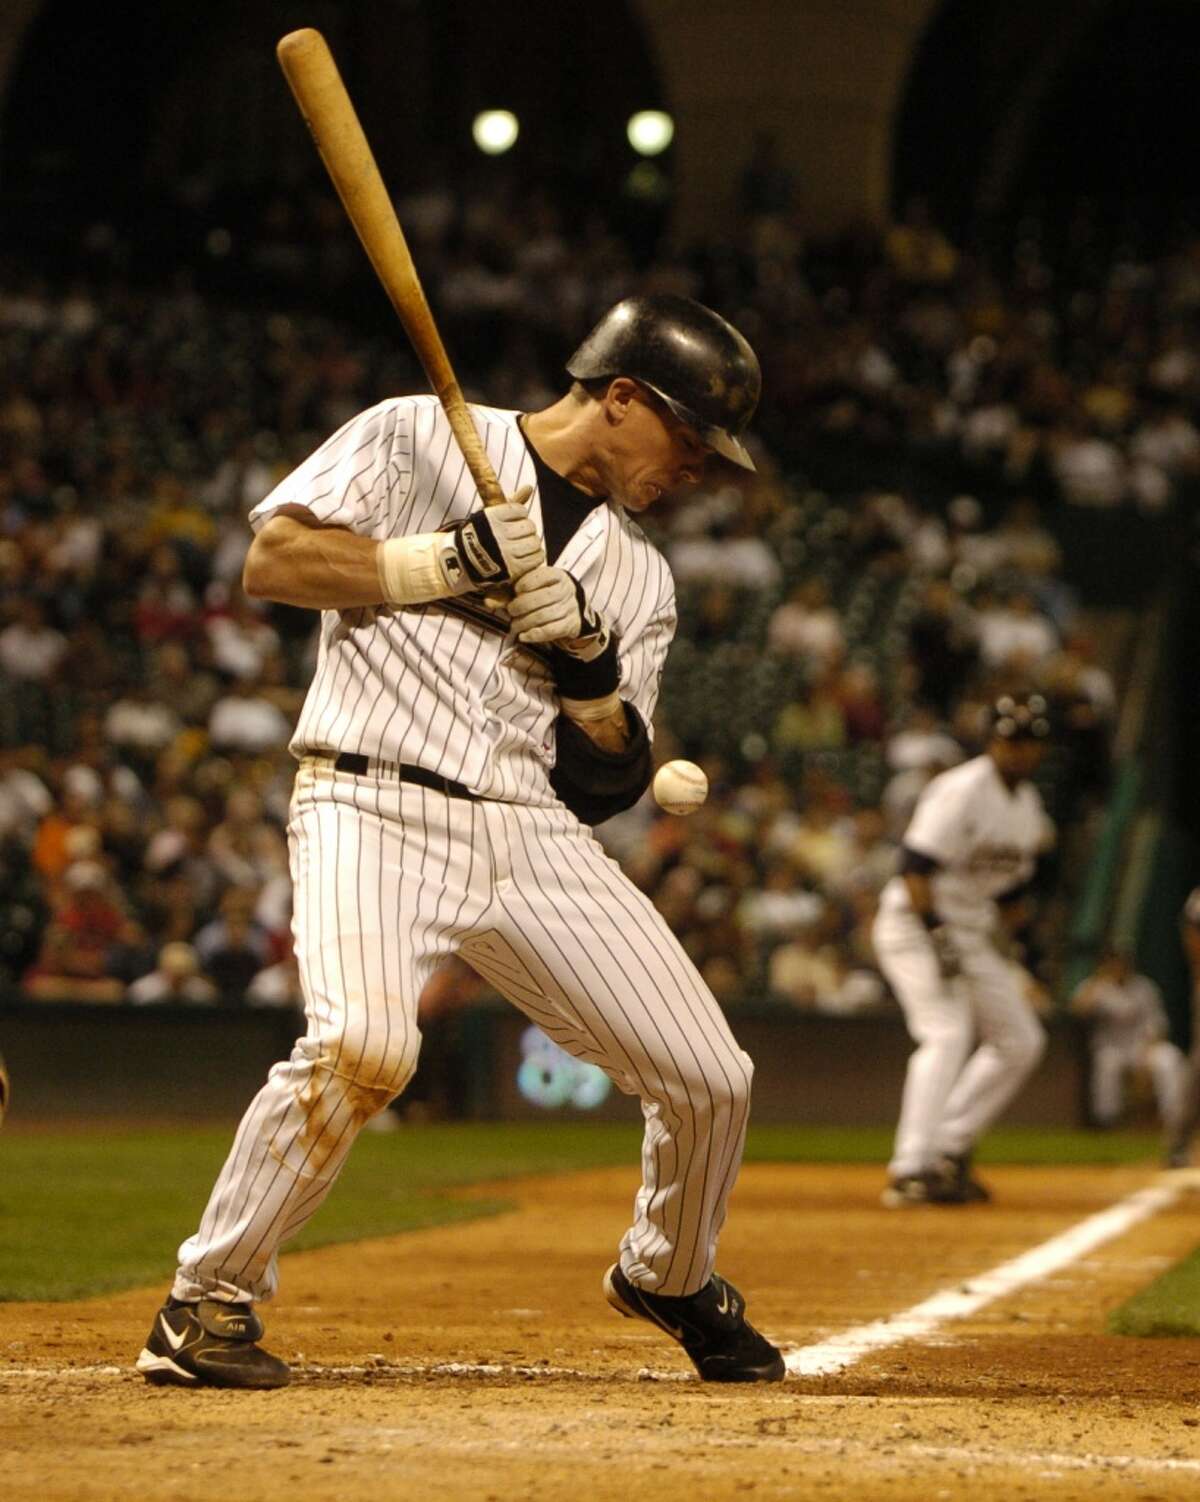 Setting the HBP record Biggio never shied from taking one for the team. He broke Don Baylor's modern-day hit by pitch record of 267 on July 3, 2005, For his career, Biggio was hit by a pitch 285 times.